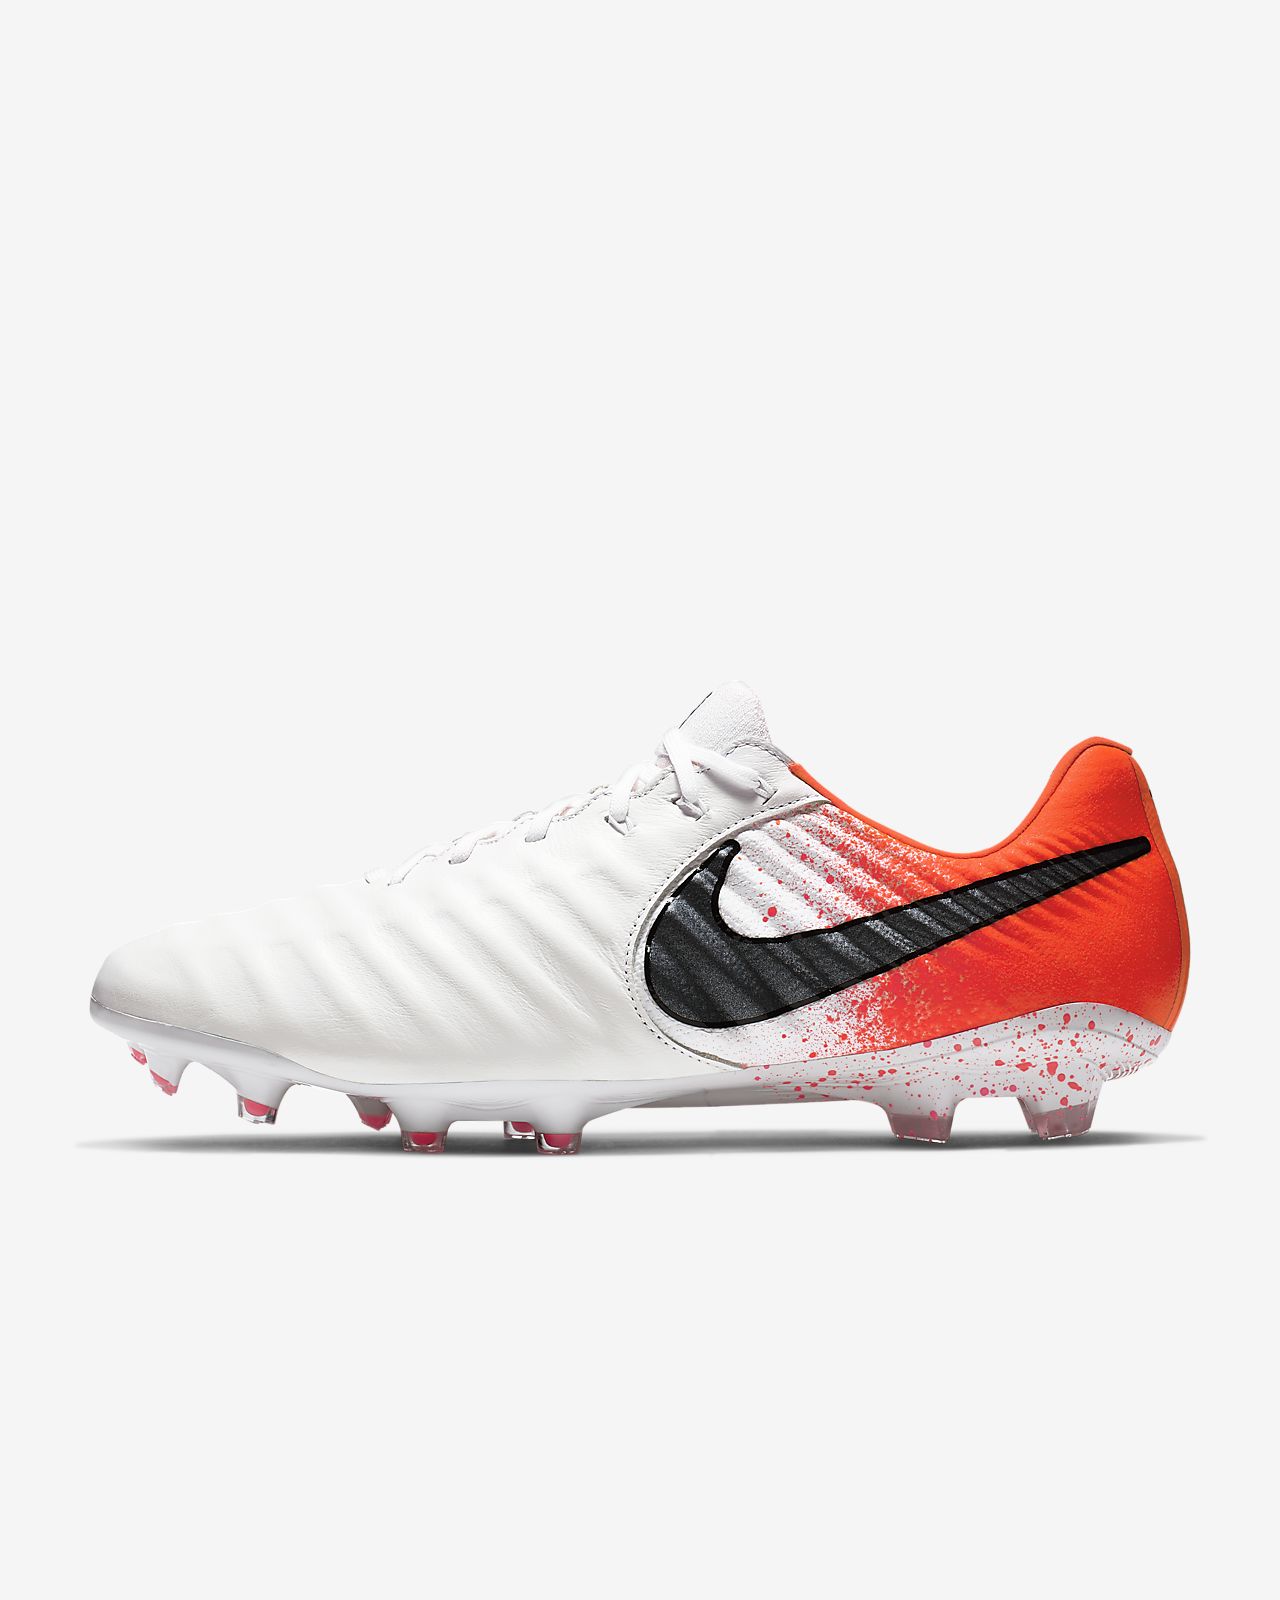 Elite FG Firm-Ground Soccer Cleat. Nike 